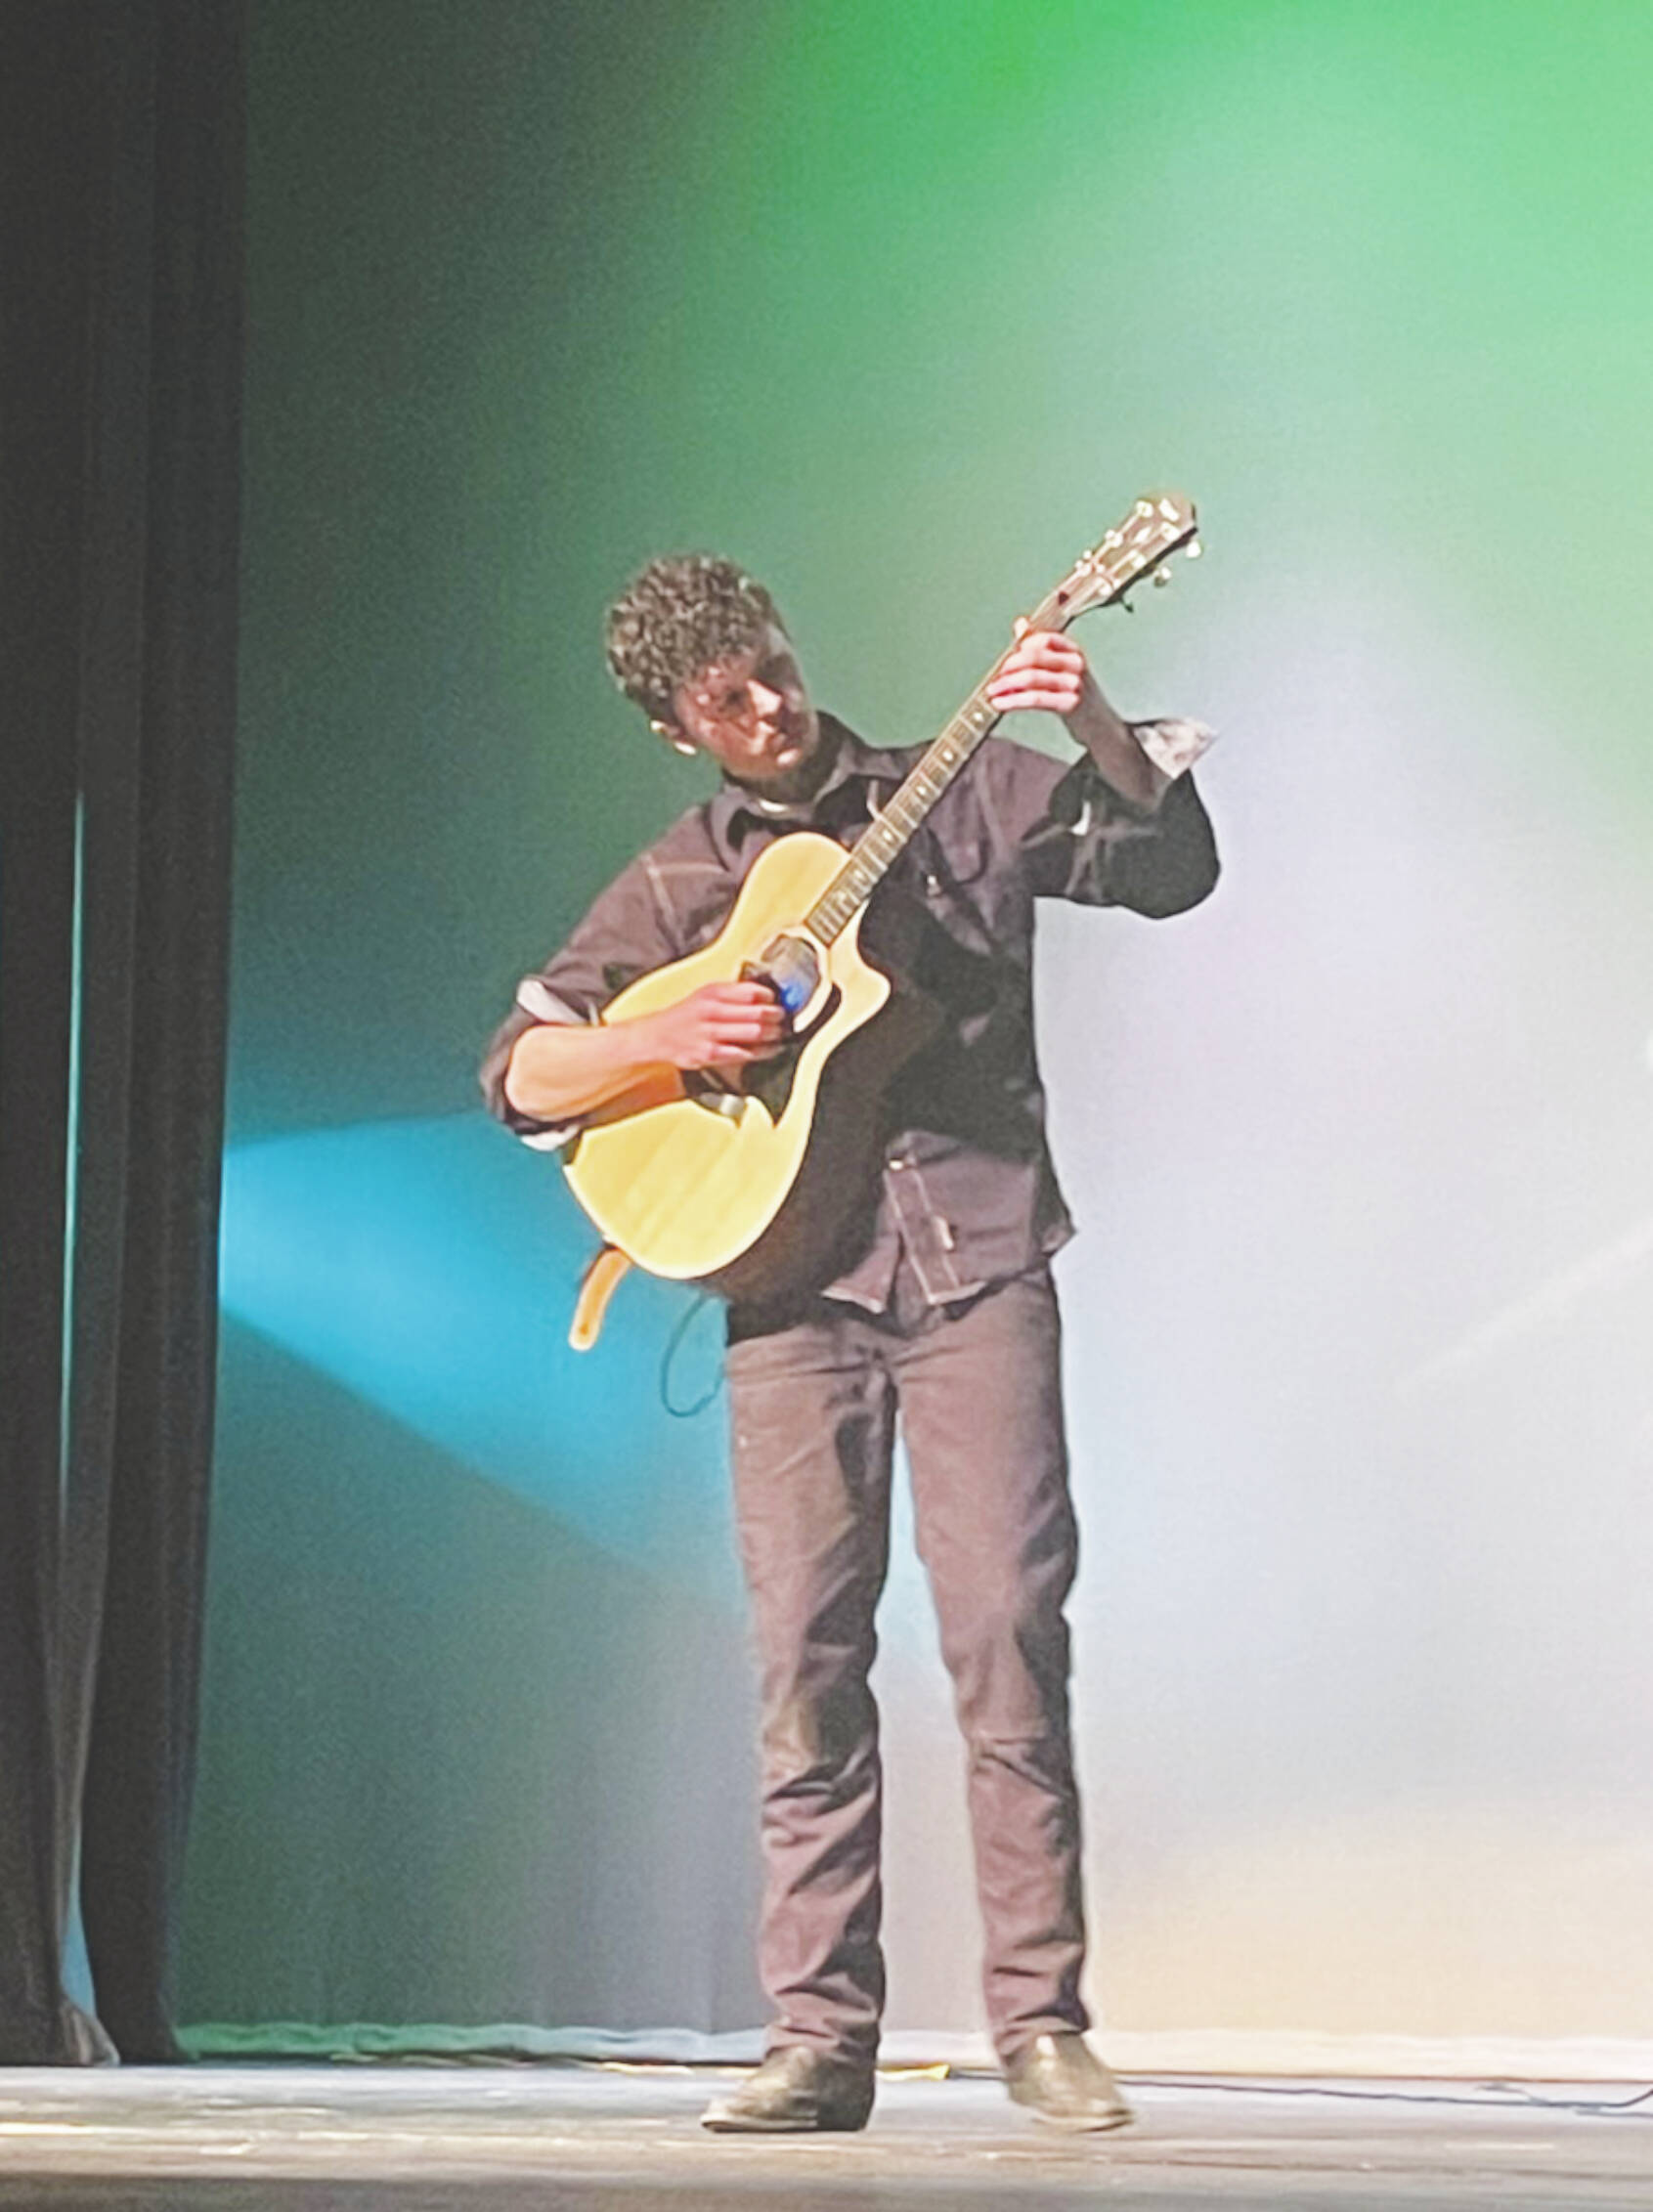 Silas Jones completes the Jubilee! evening of talent events at the Mariner Theatre last Friday<ins>, April 19, in Homer, Alaska</ins>. Photo by Emilie Springer.